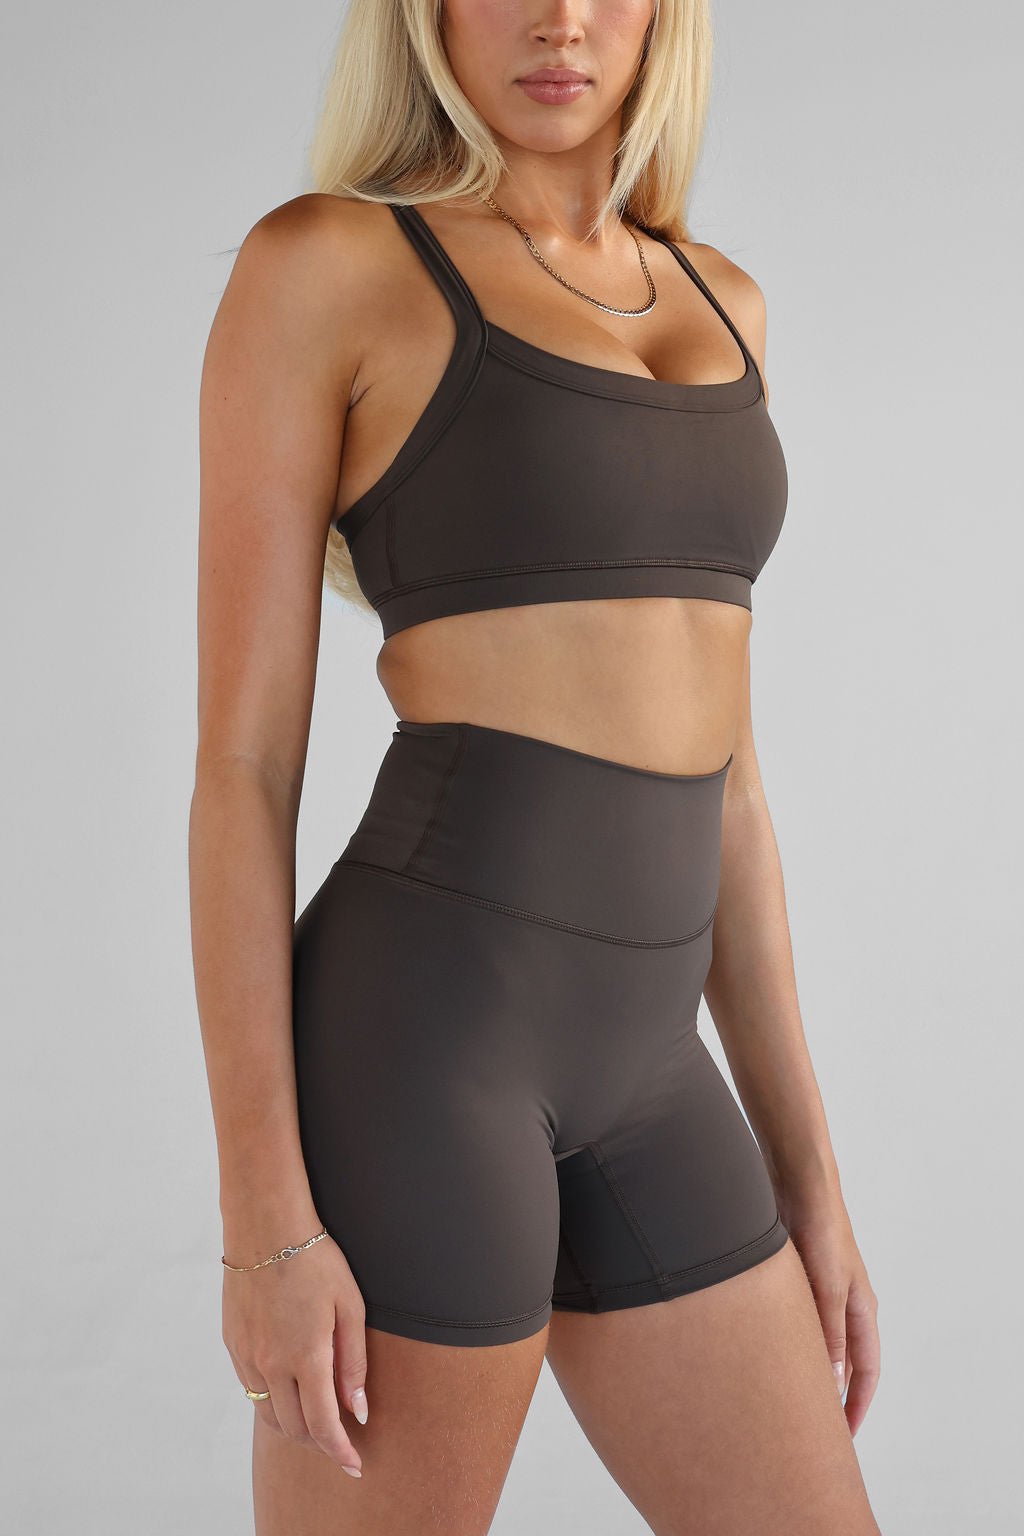 SCULPT Cross Back Crop - Dark Chocolate SHIPPING FROM 12/02 - LEELO ACTIVE